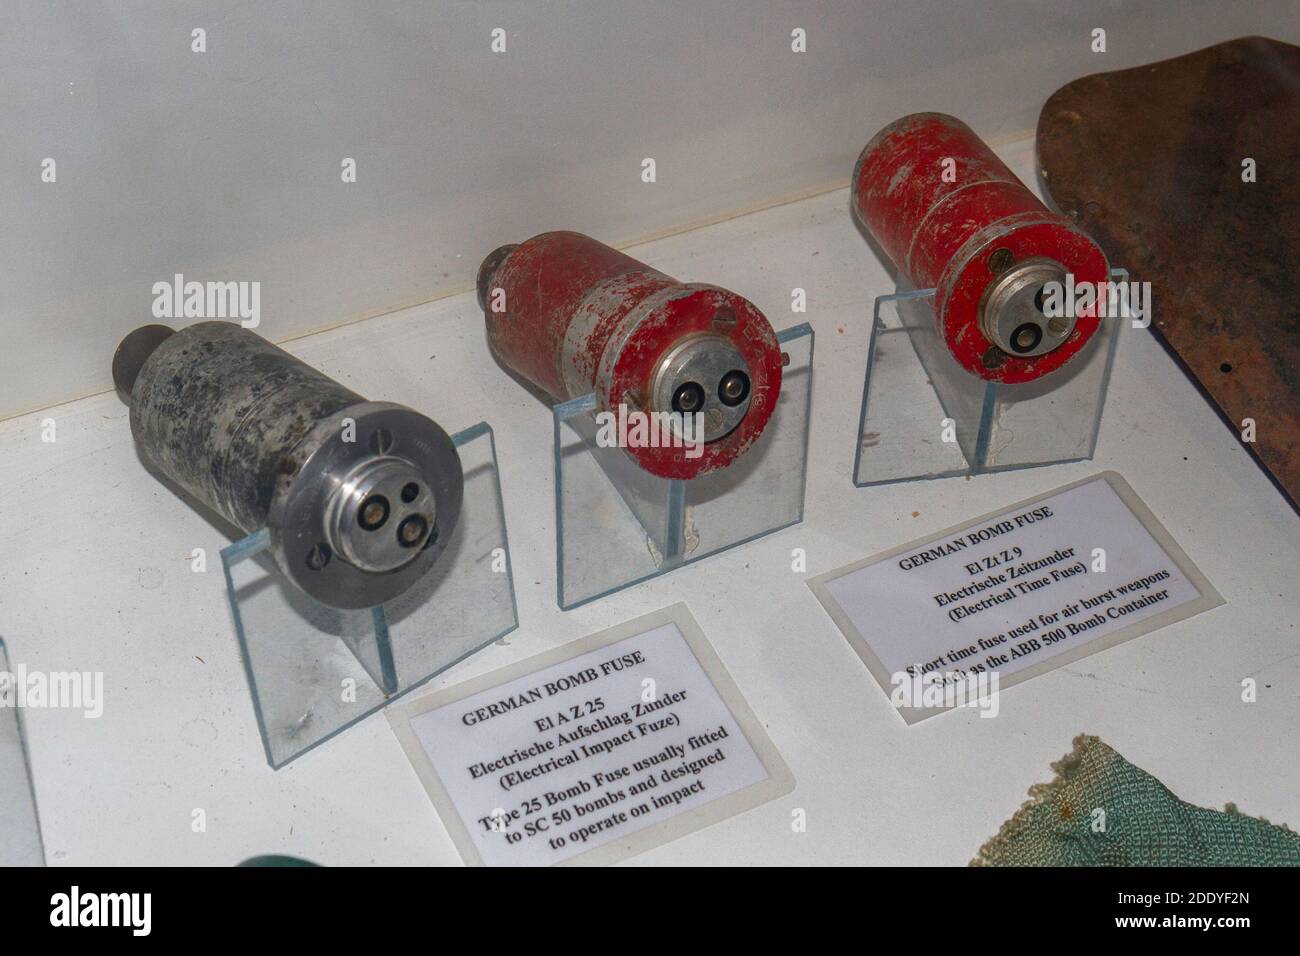 Three German WWII bomb fuses, Thorpe Camp Visitor Centre, a WWII Royal Air Force barracks, Lincolnshire, UK. Stock Photo